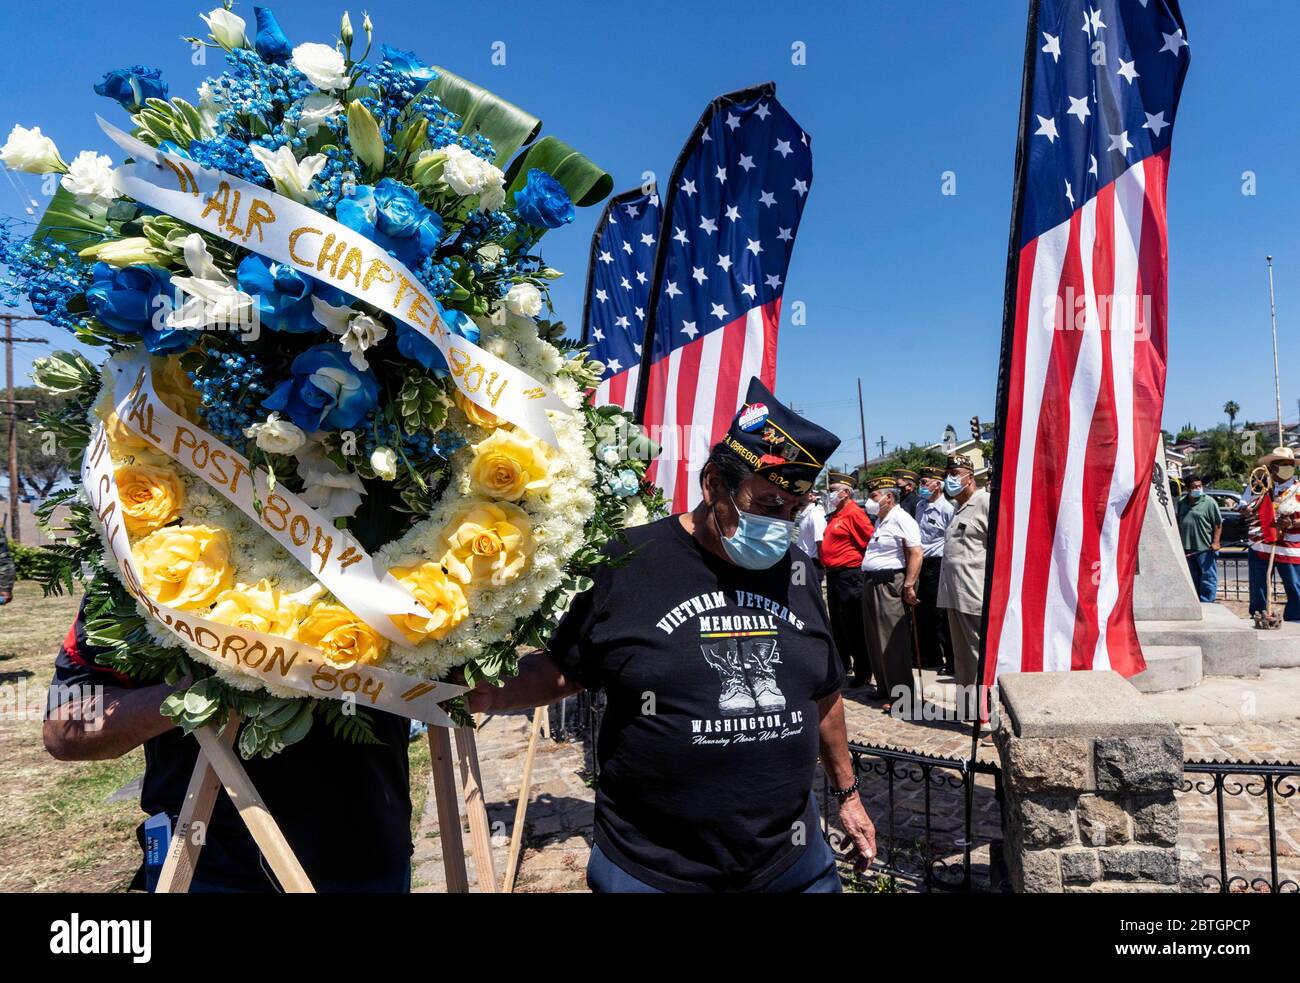 Los Angeles, California, USA. 15th Mar, 2019. Veterans wearing face masks as a preventive measure against the spread of COVID 19 pandemic participate in a Memorial Day Ceremony in Los Angeles.The event took place at the Los Cinco Puntos/Five Points Memorial that honours Mexican American soldiers who died in the World War II, the Korean War, and the Vietnam War. Credit: Ronen Tivony/SOPA Images/ZUMA Wire/Alamy Live News Stock Photo